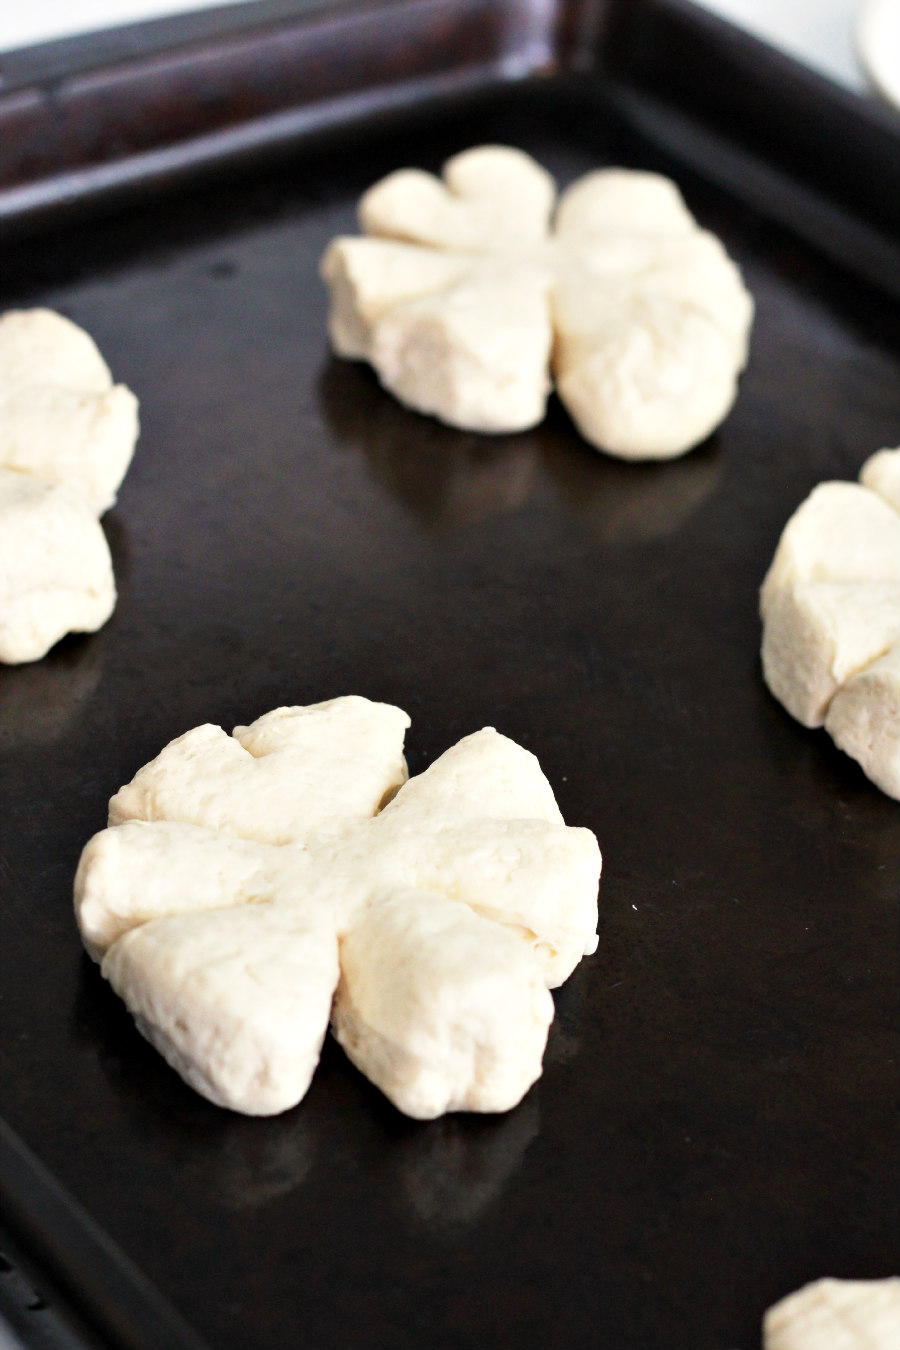 Uncooked biscuit dough cut into shamrock shapes spread out on a dark baking sheet.